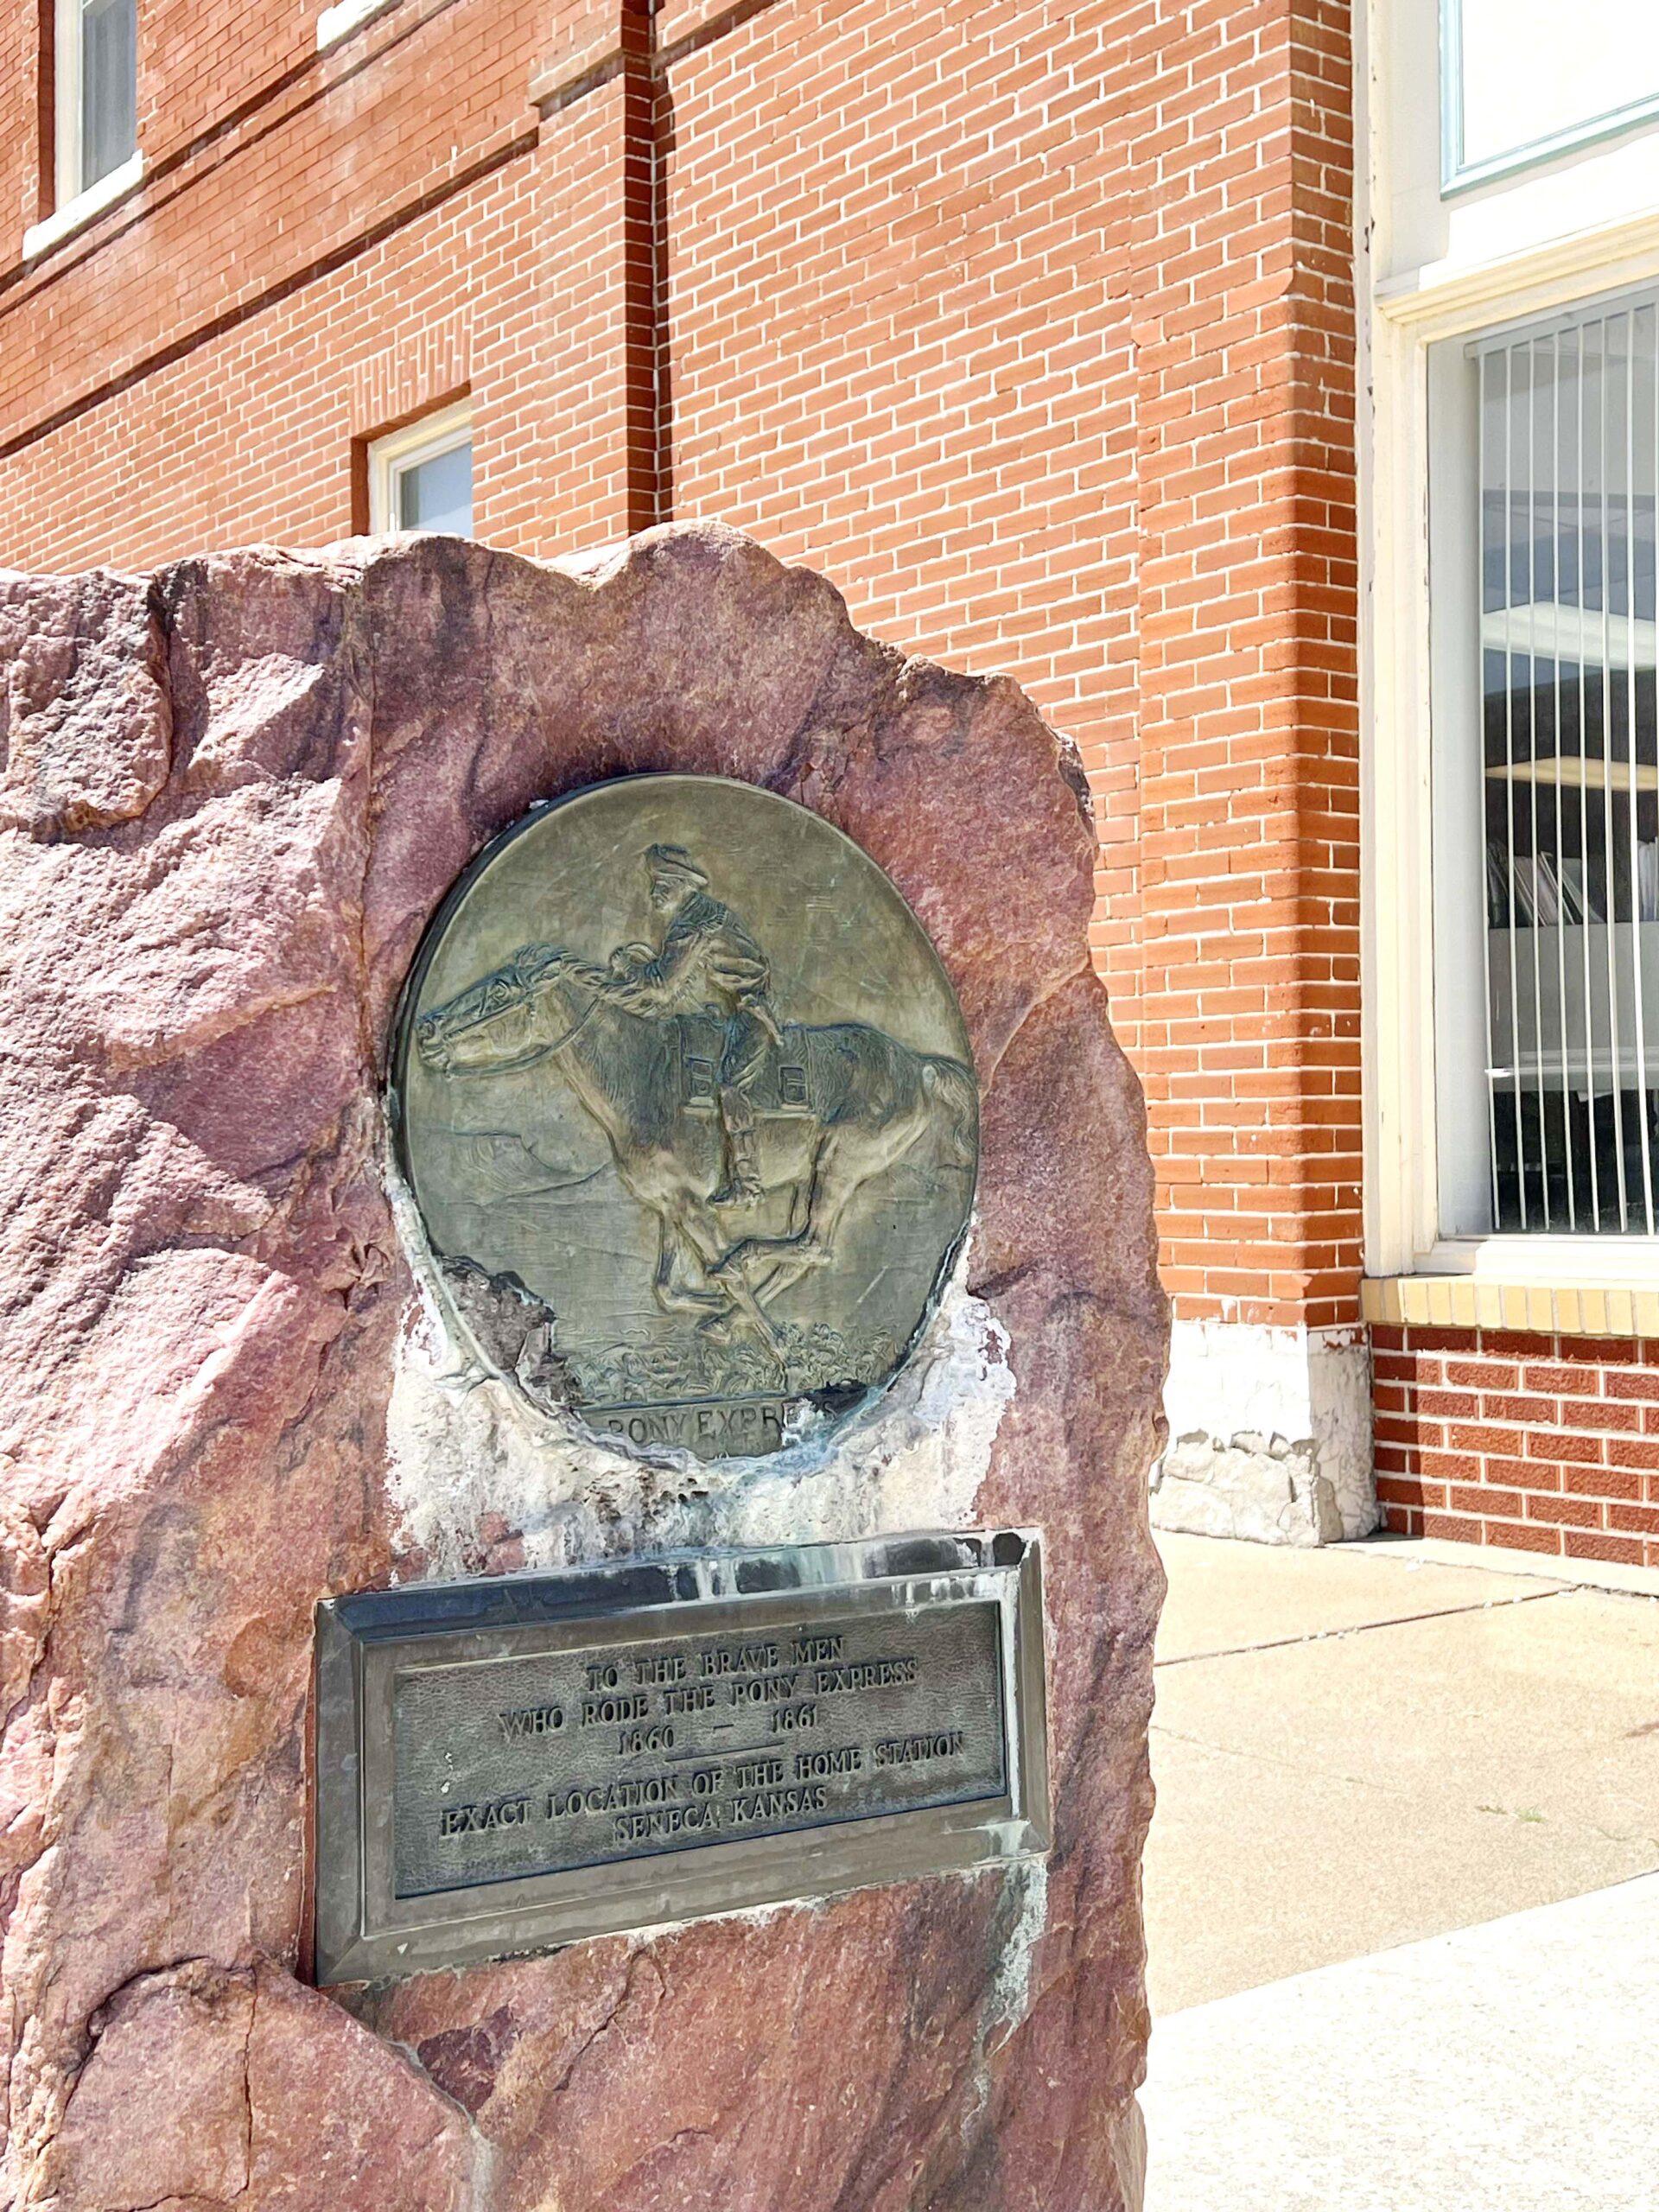 A historical marker at the site of the exact Pony Express home station reads, 